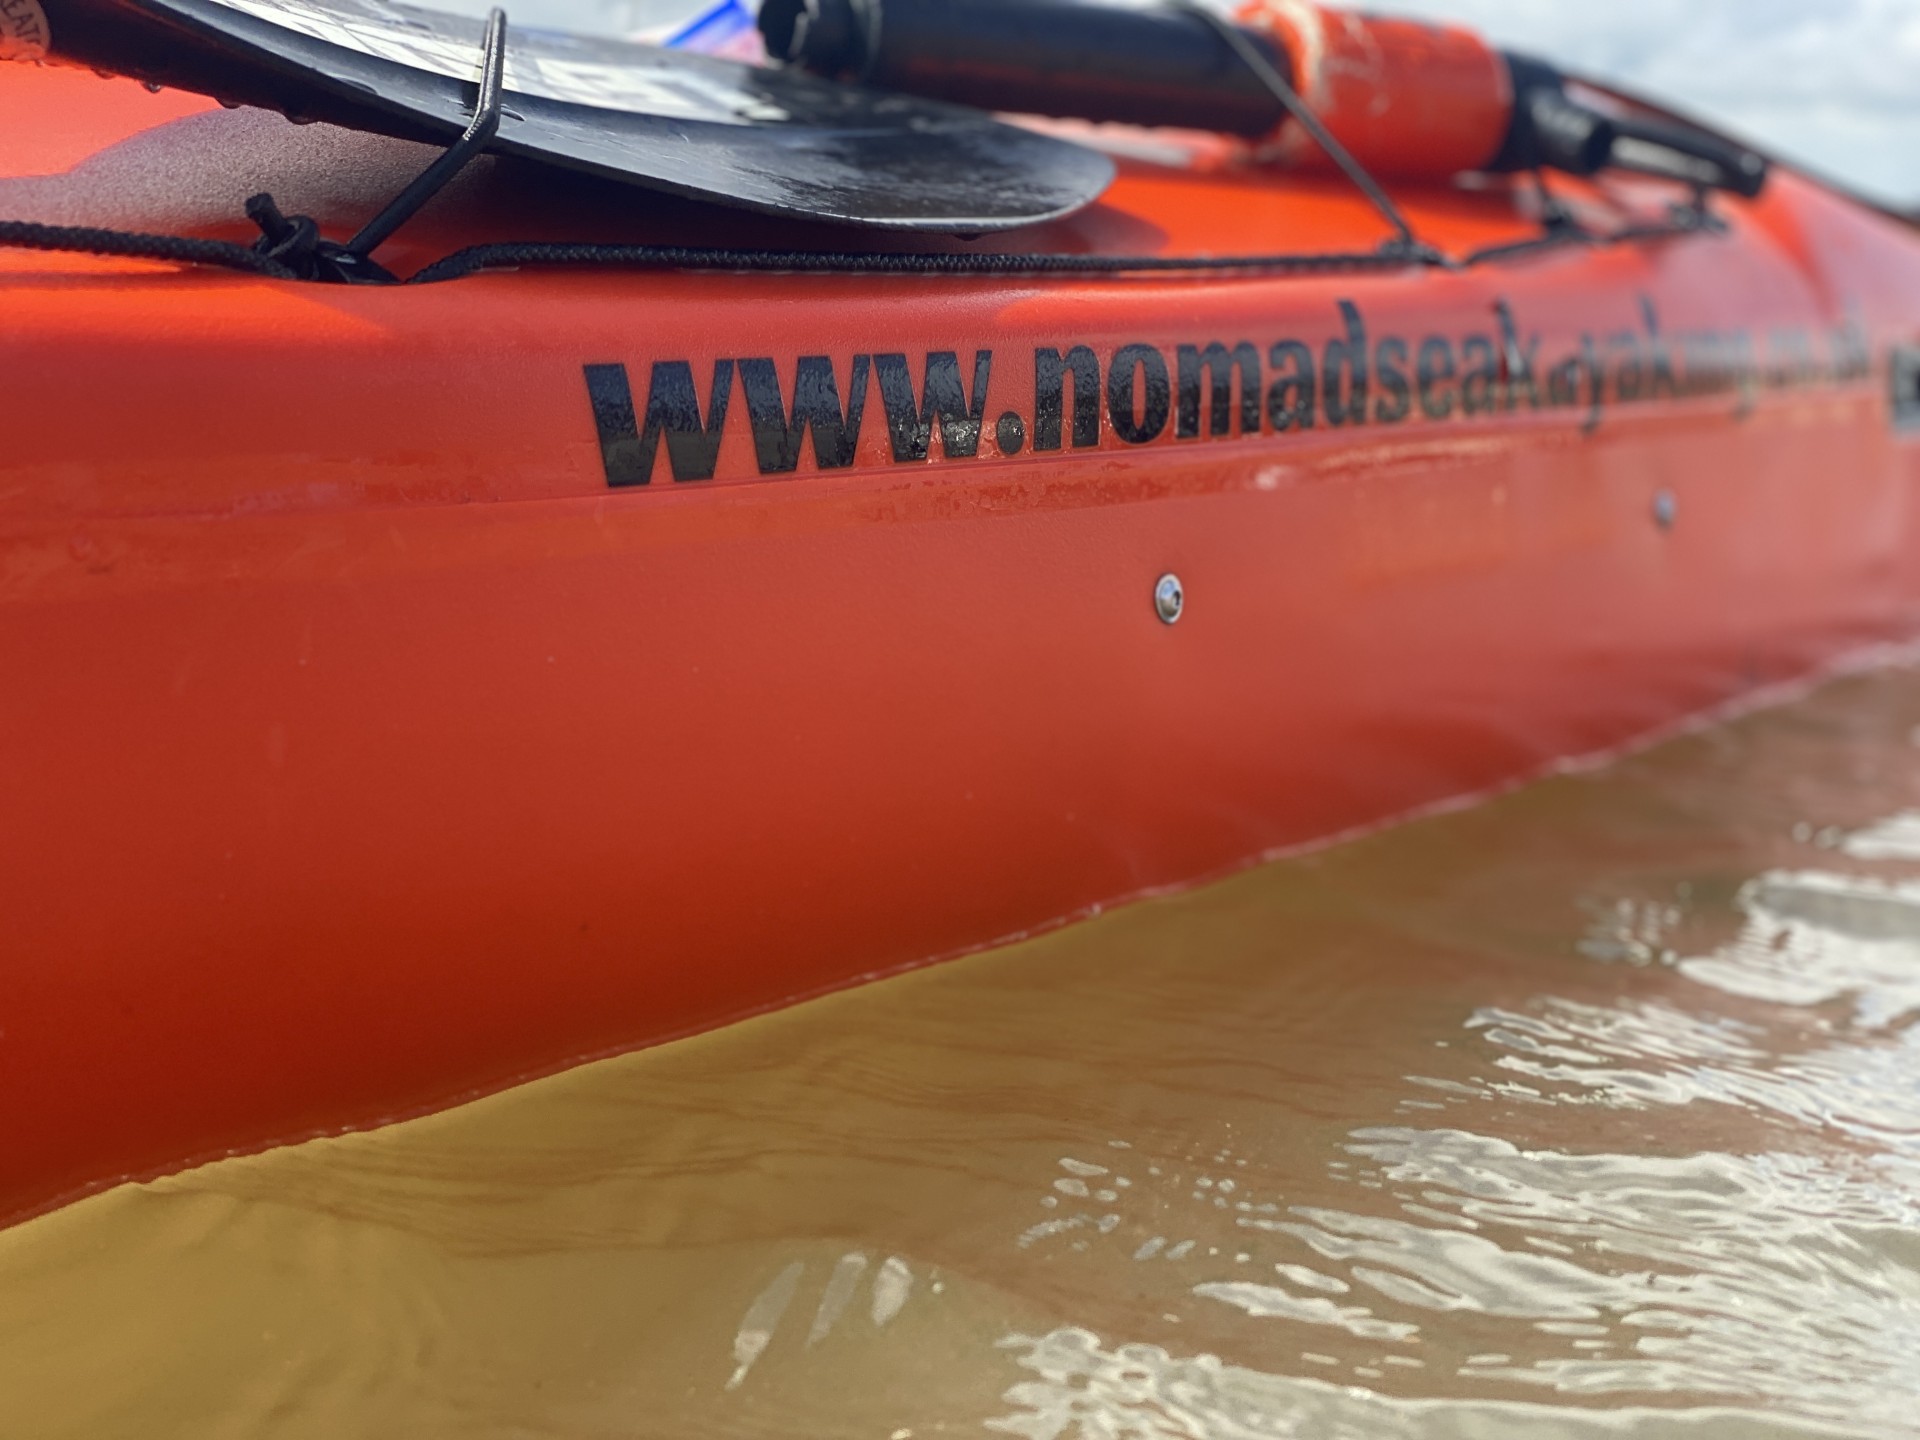 www.nomadseakayaking.co.uk website on the side of a sea kayak on the water.